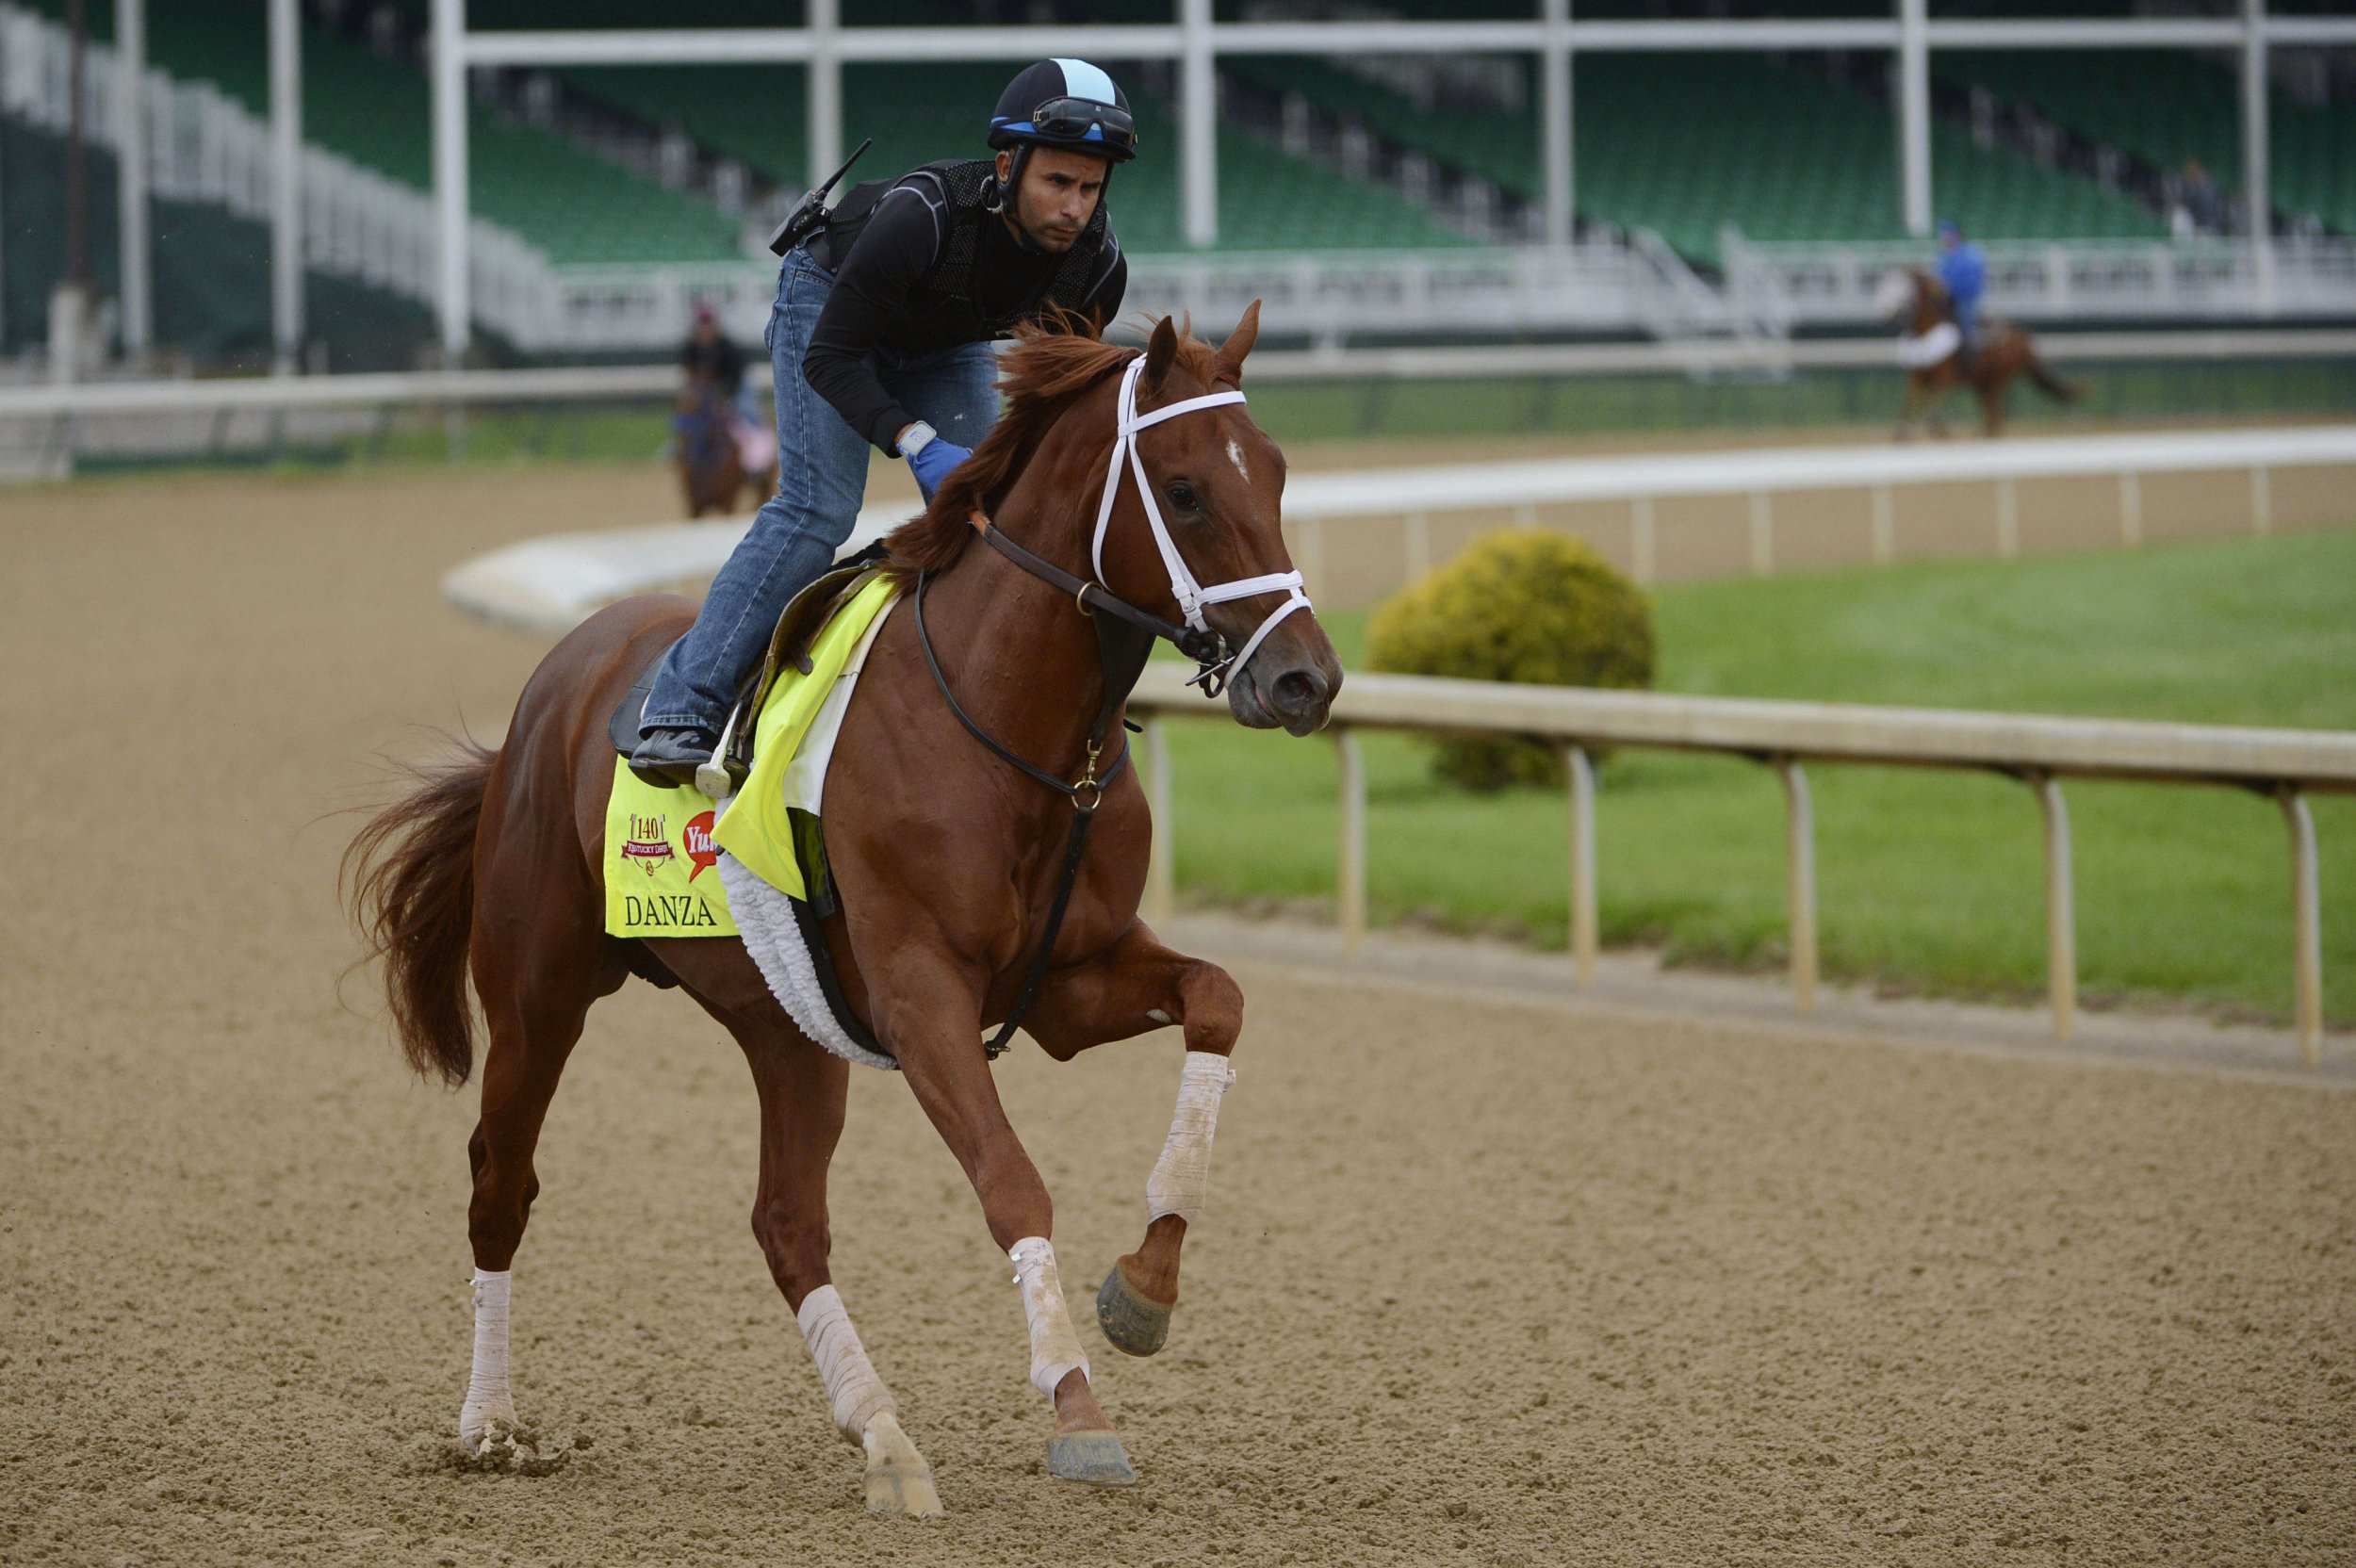 Kentucky Derby 2014 Horses Top Contenders, Longshot Contenders And